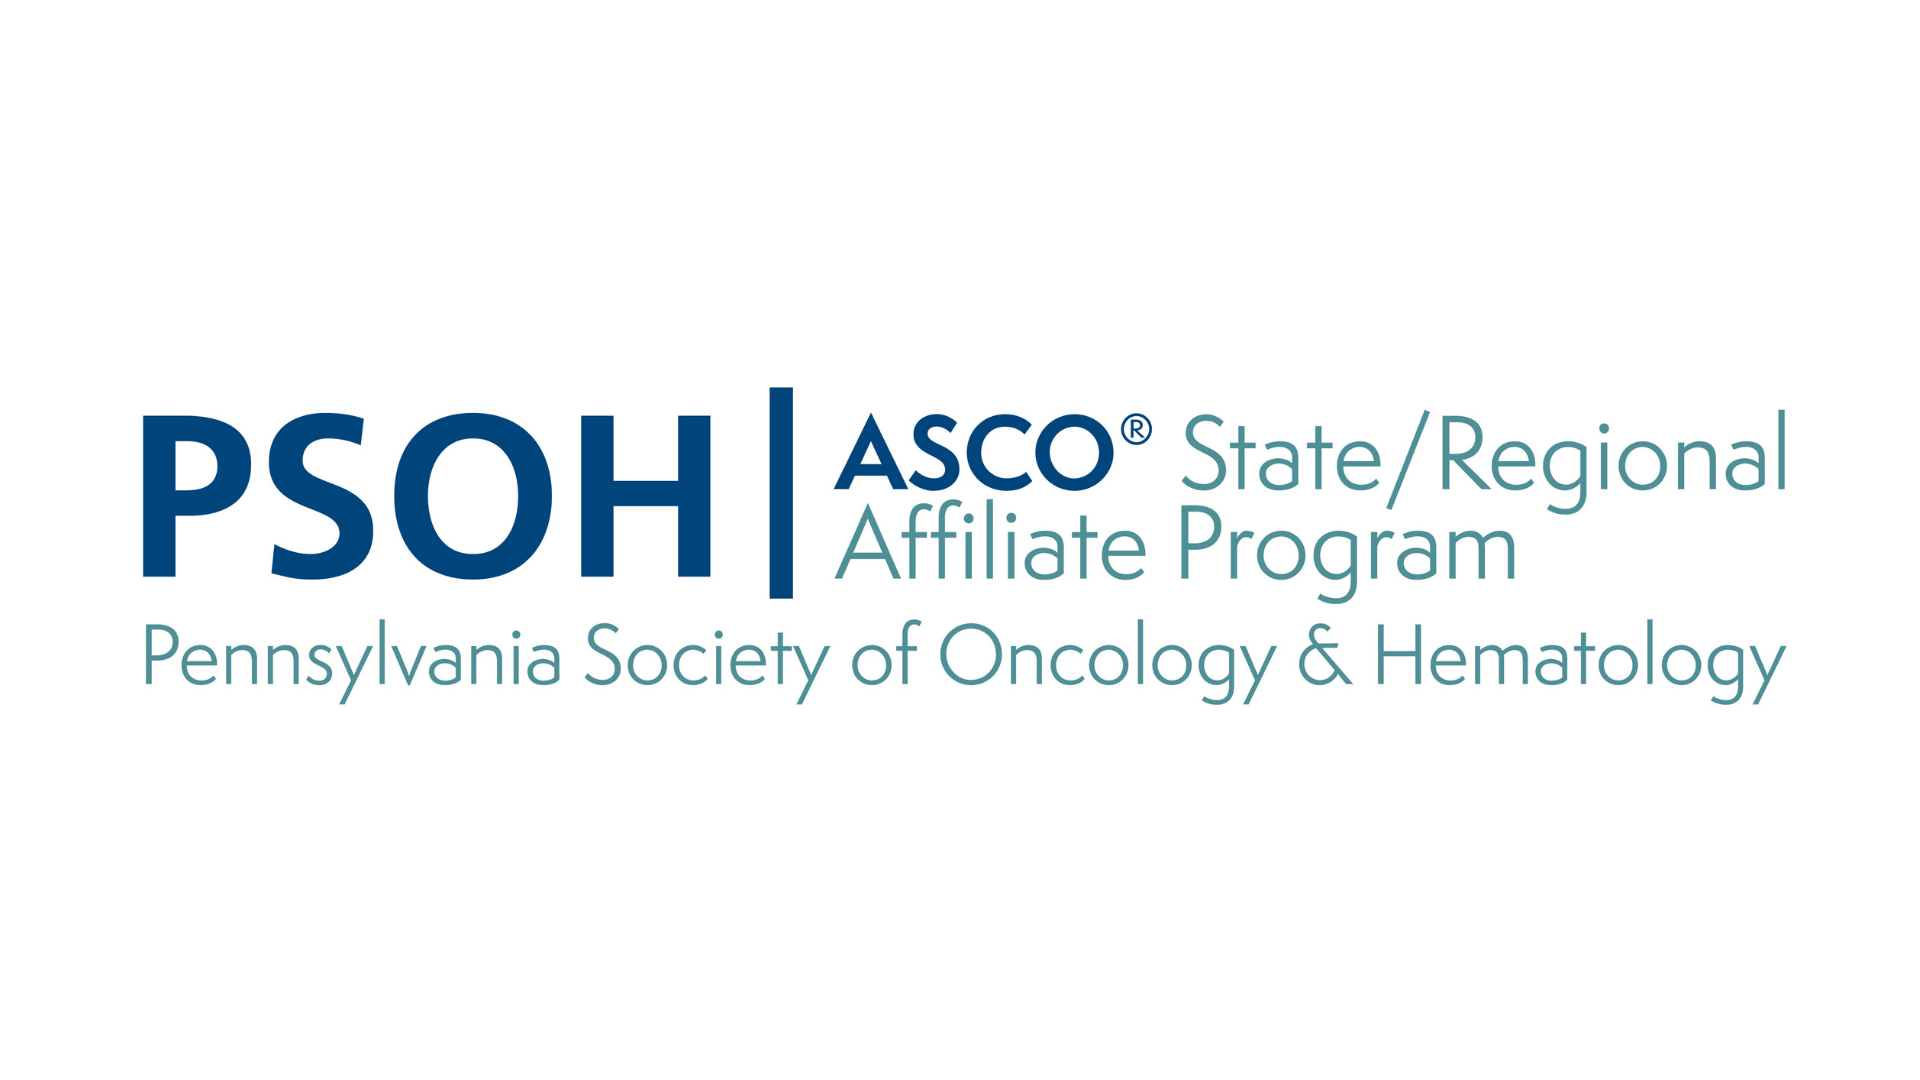 Targeted Oncology™ Announces the Addition of Pennsylvania Society of Oncology and Hematology to Its Strategic Alliance Partnership Program